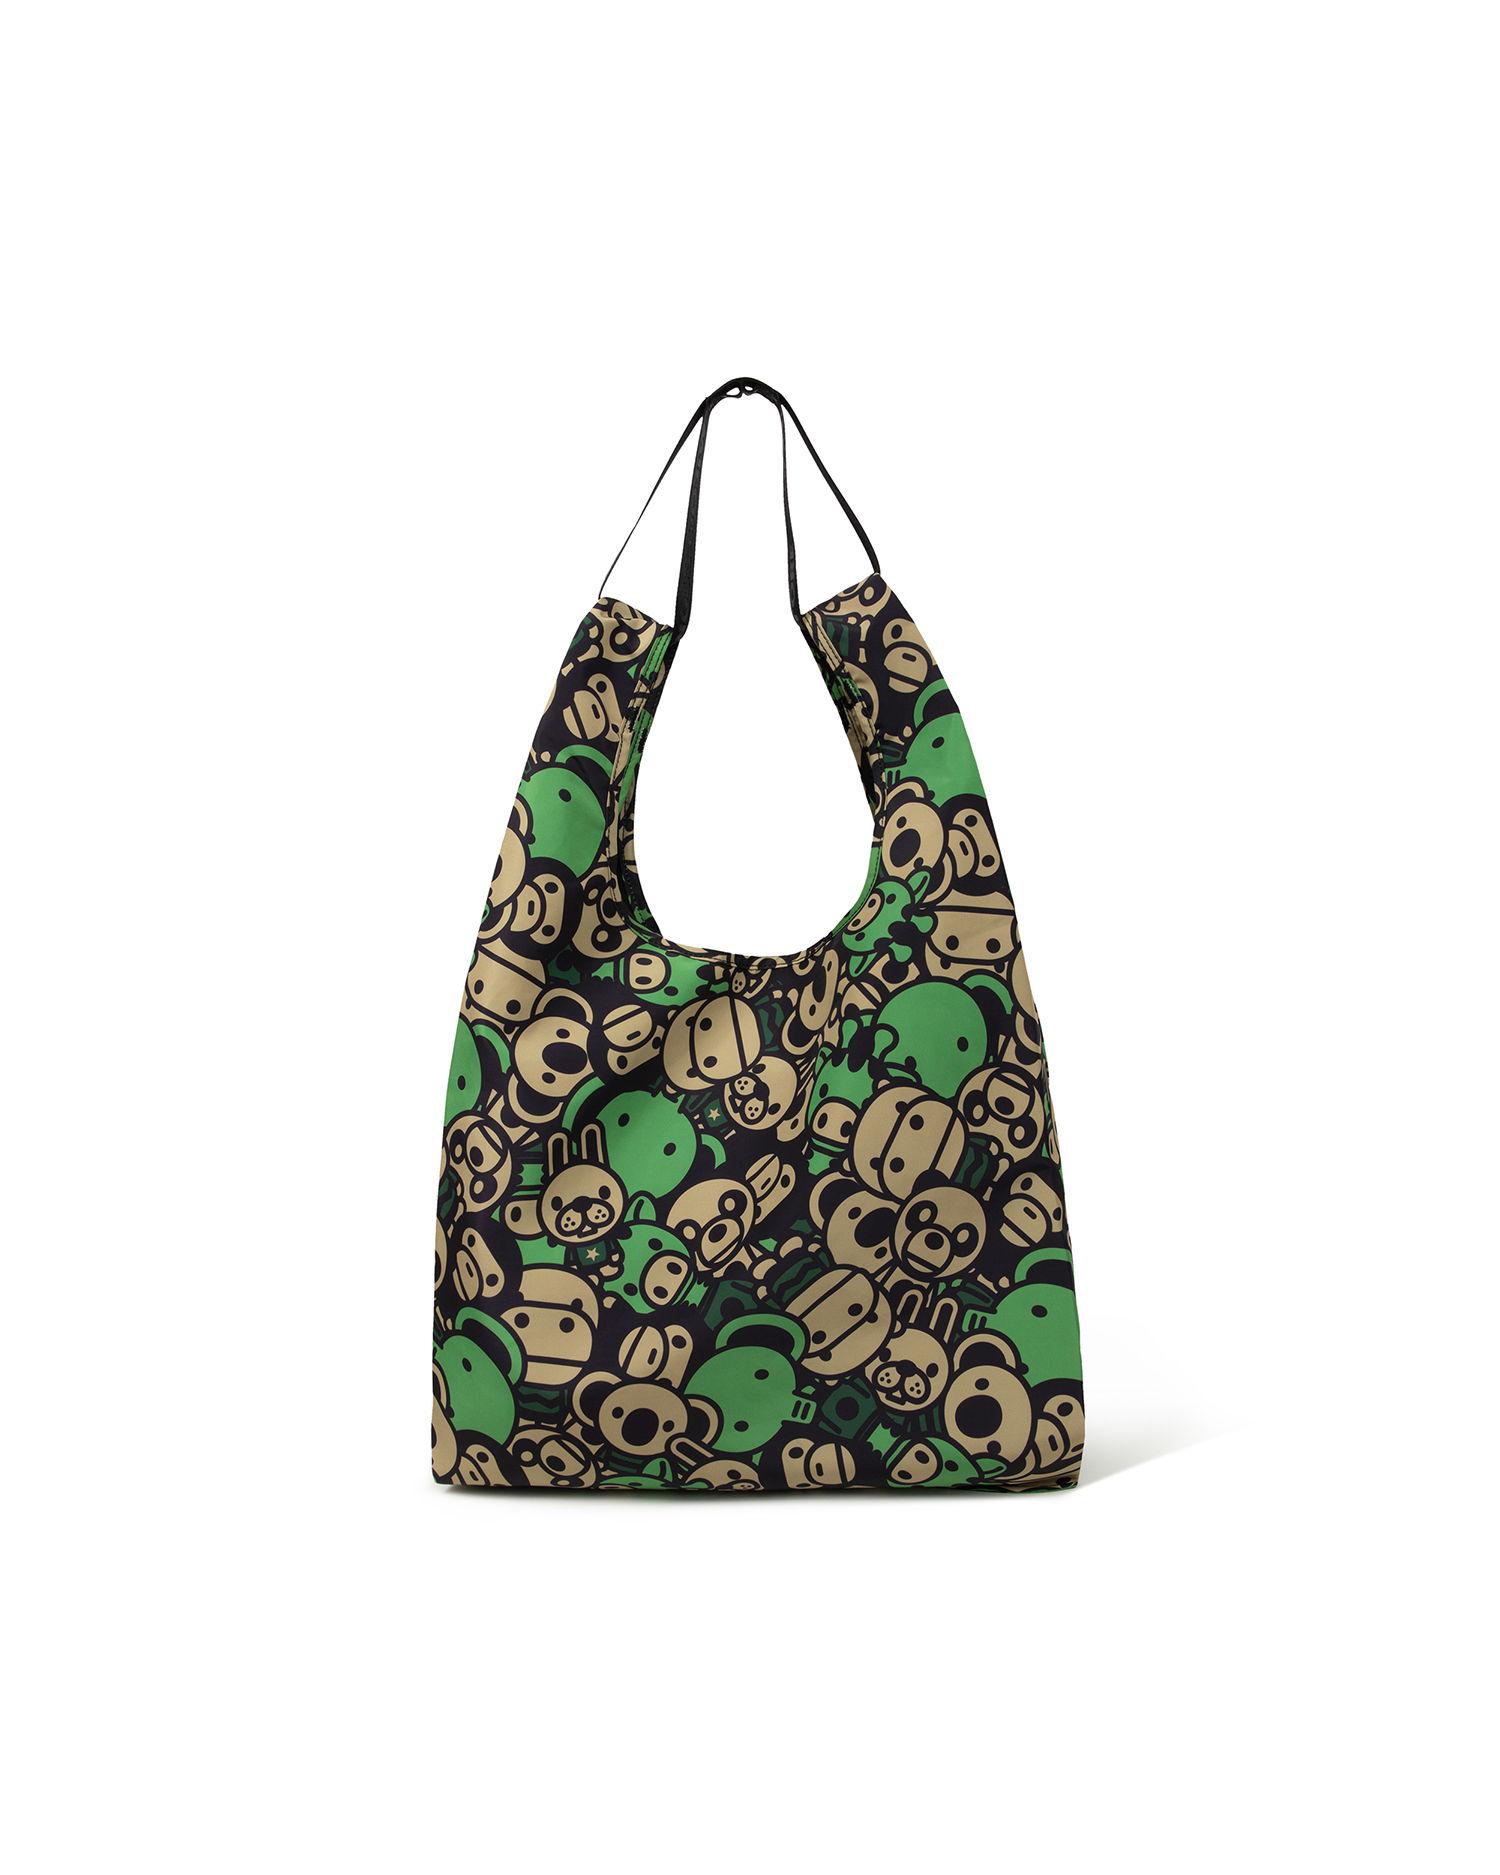 Tote bag by *BABY MILO(R) STORE